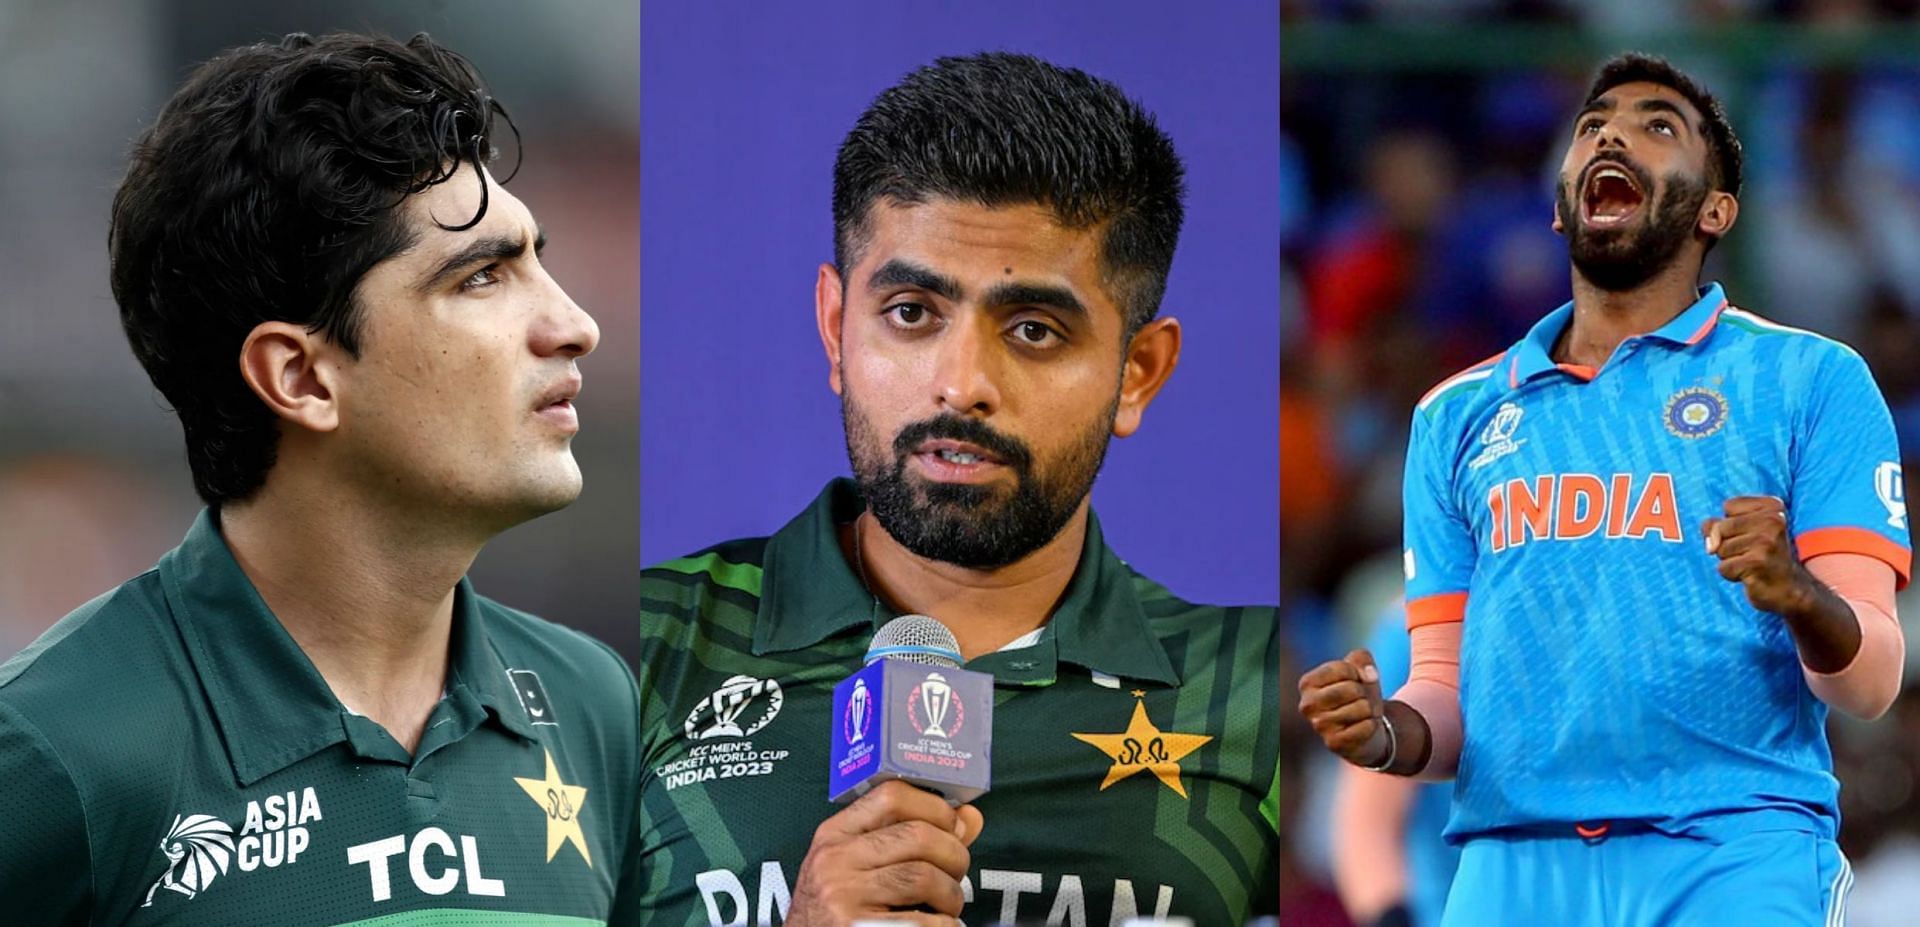 Pakistan white-ball skipper Babar Azam has picked pacer Naseem Shah over Indian speedster Jasprit Bumrah when asked about who his preferred option was among the two talented fast bowlers in a last-over scenario that was given to him on a podcast